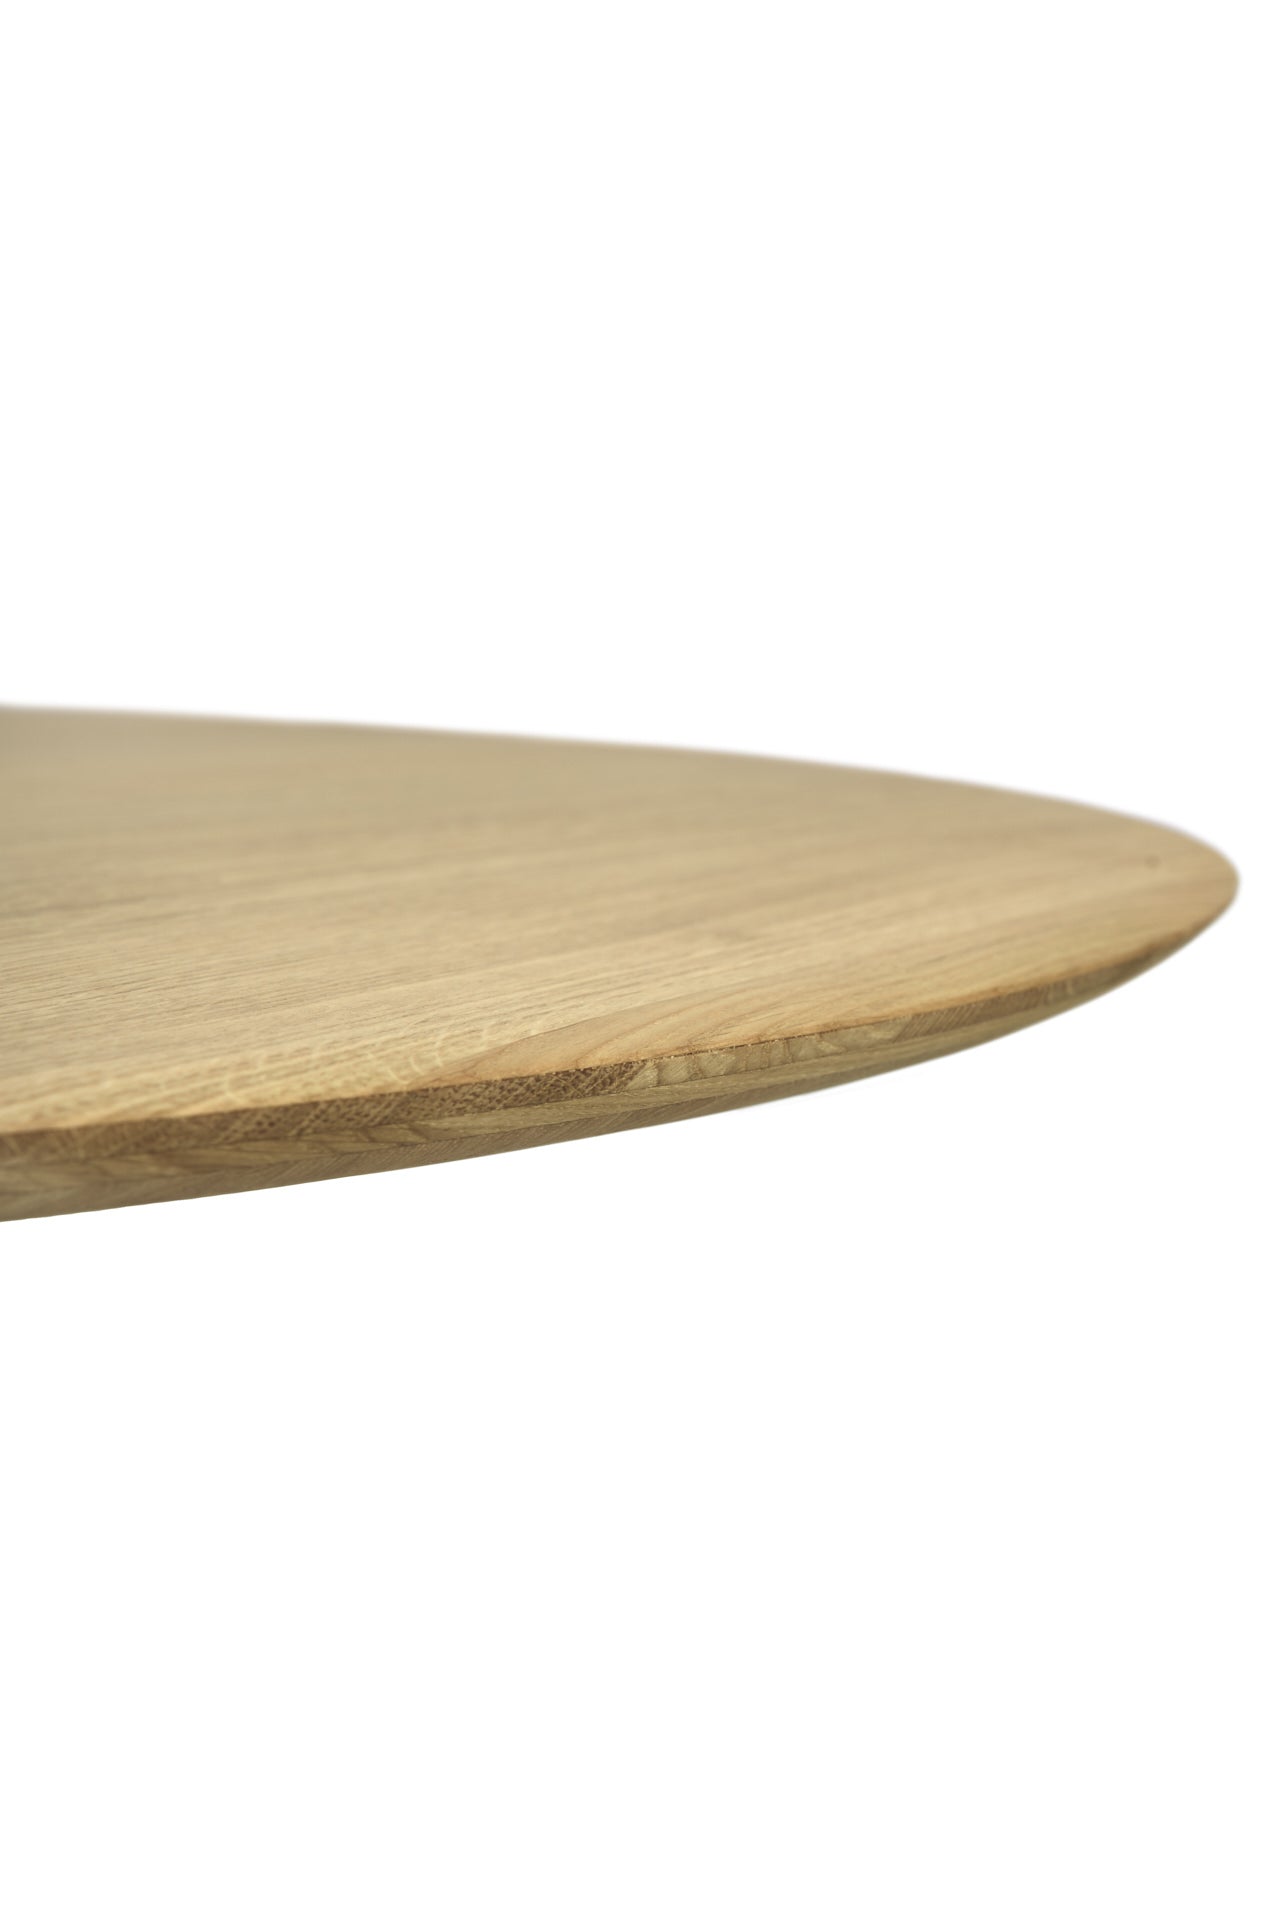 Corto Solid Oak Dining Table, Round